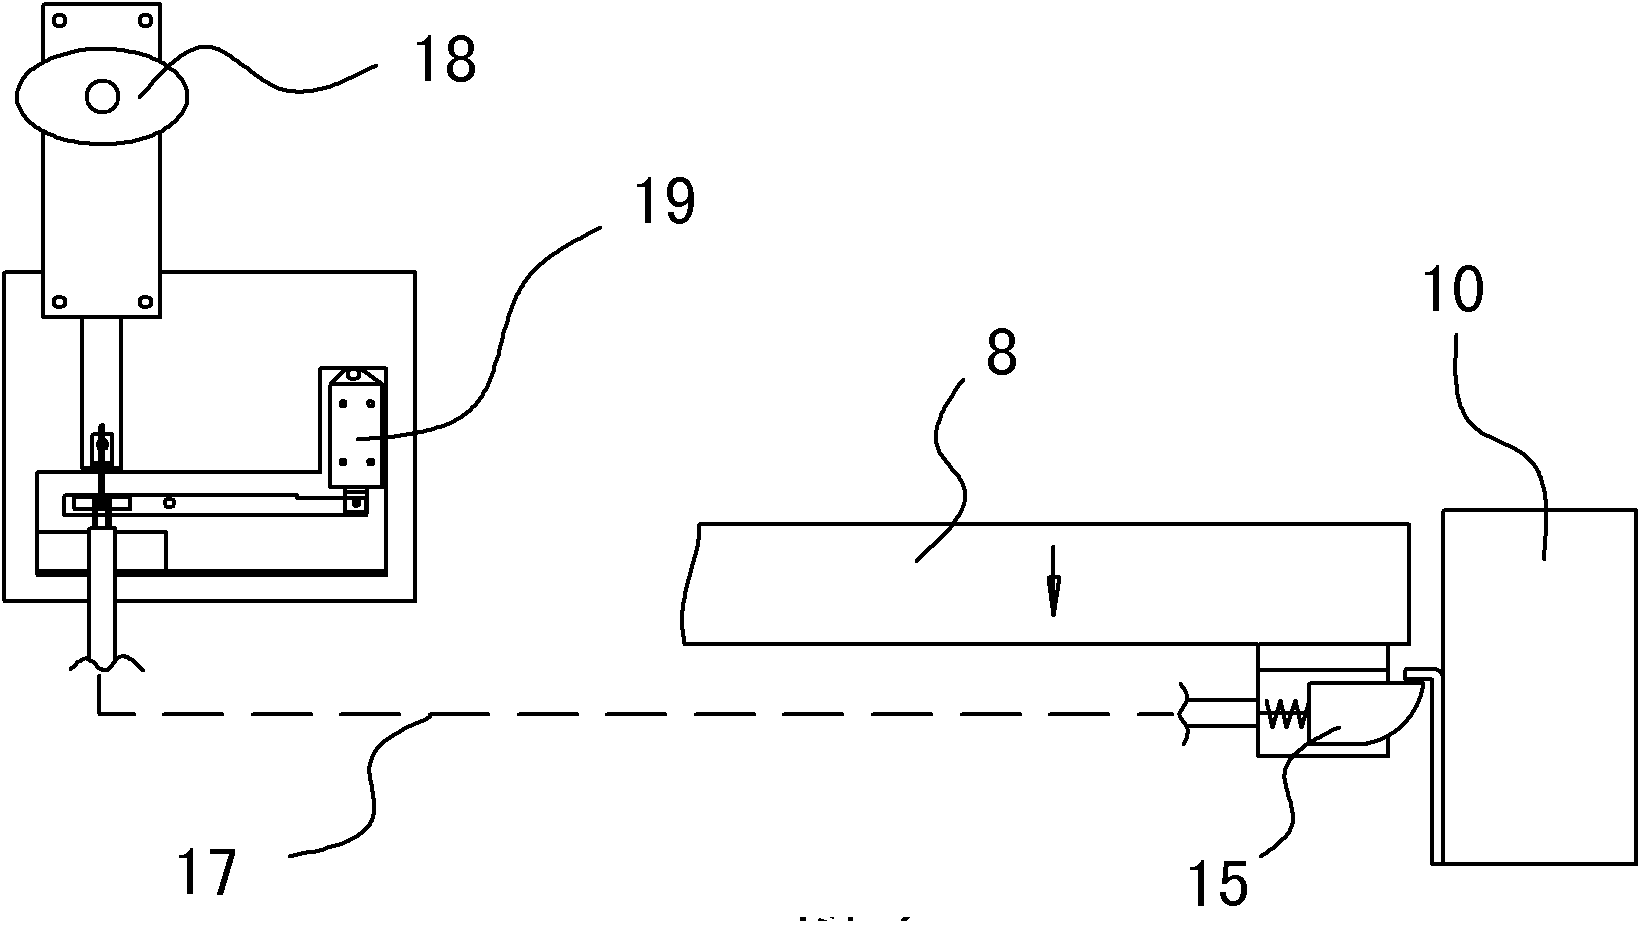 Lift-type folding door window in mutually non-interfered electronic and manual modes